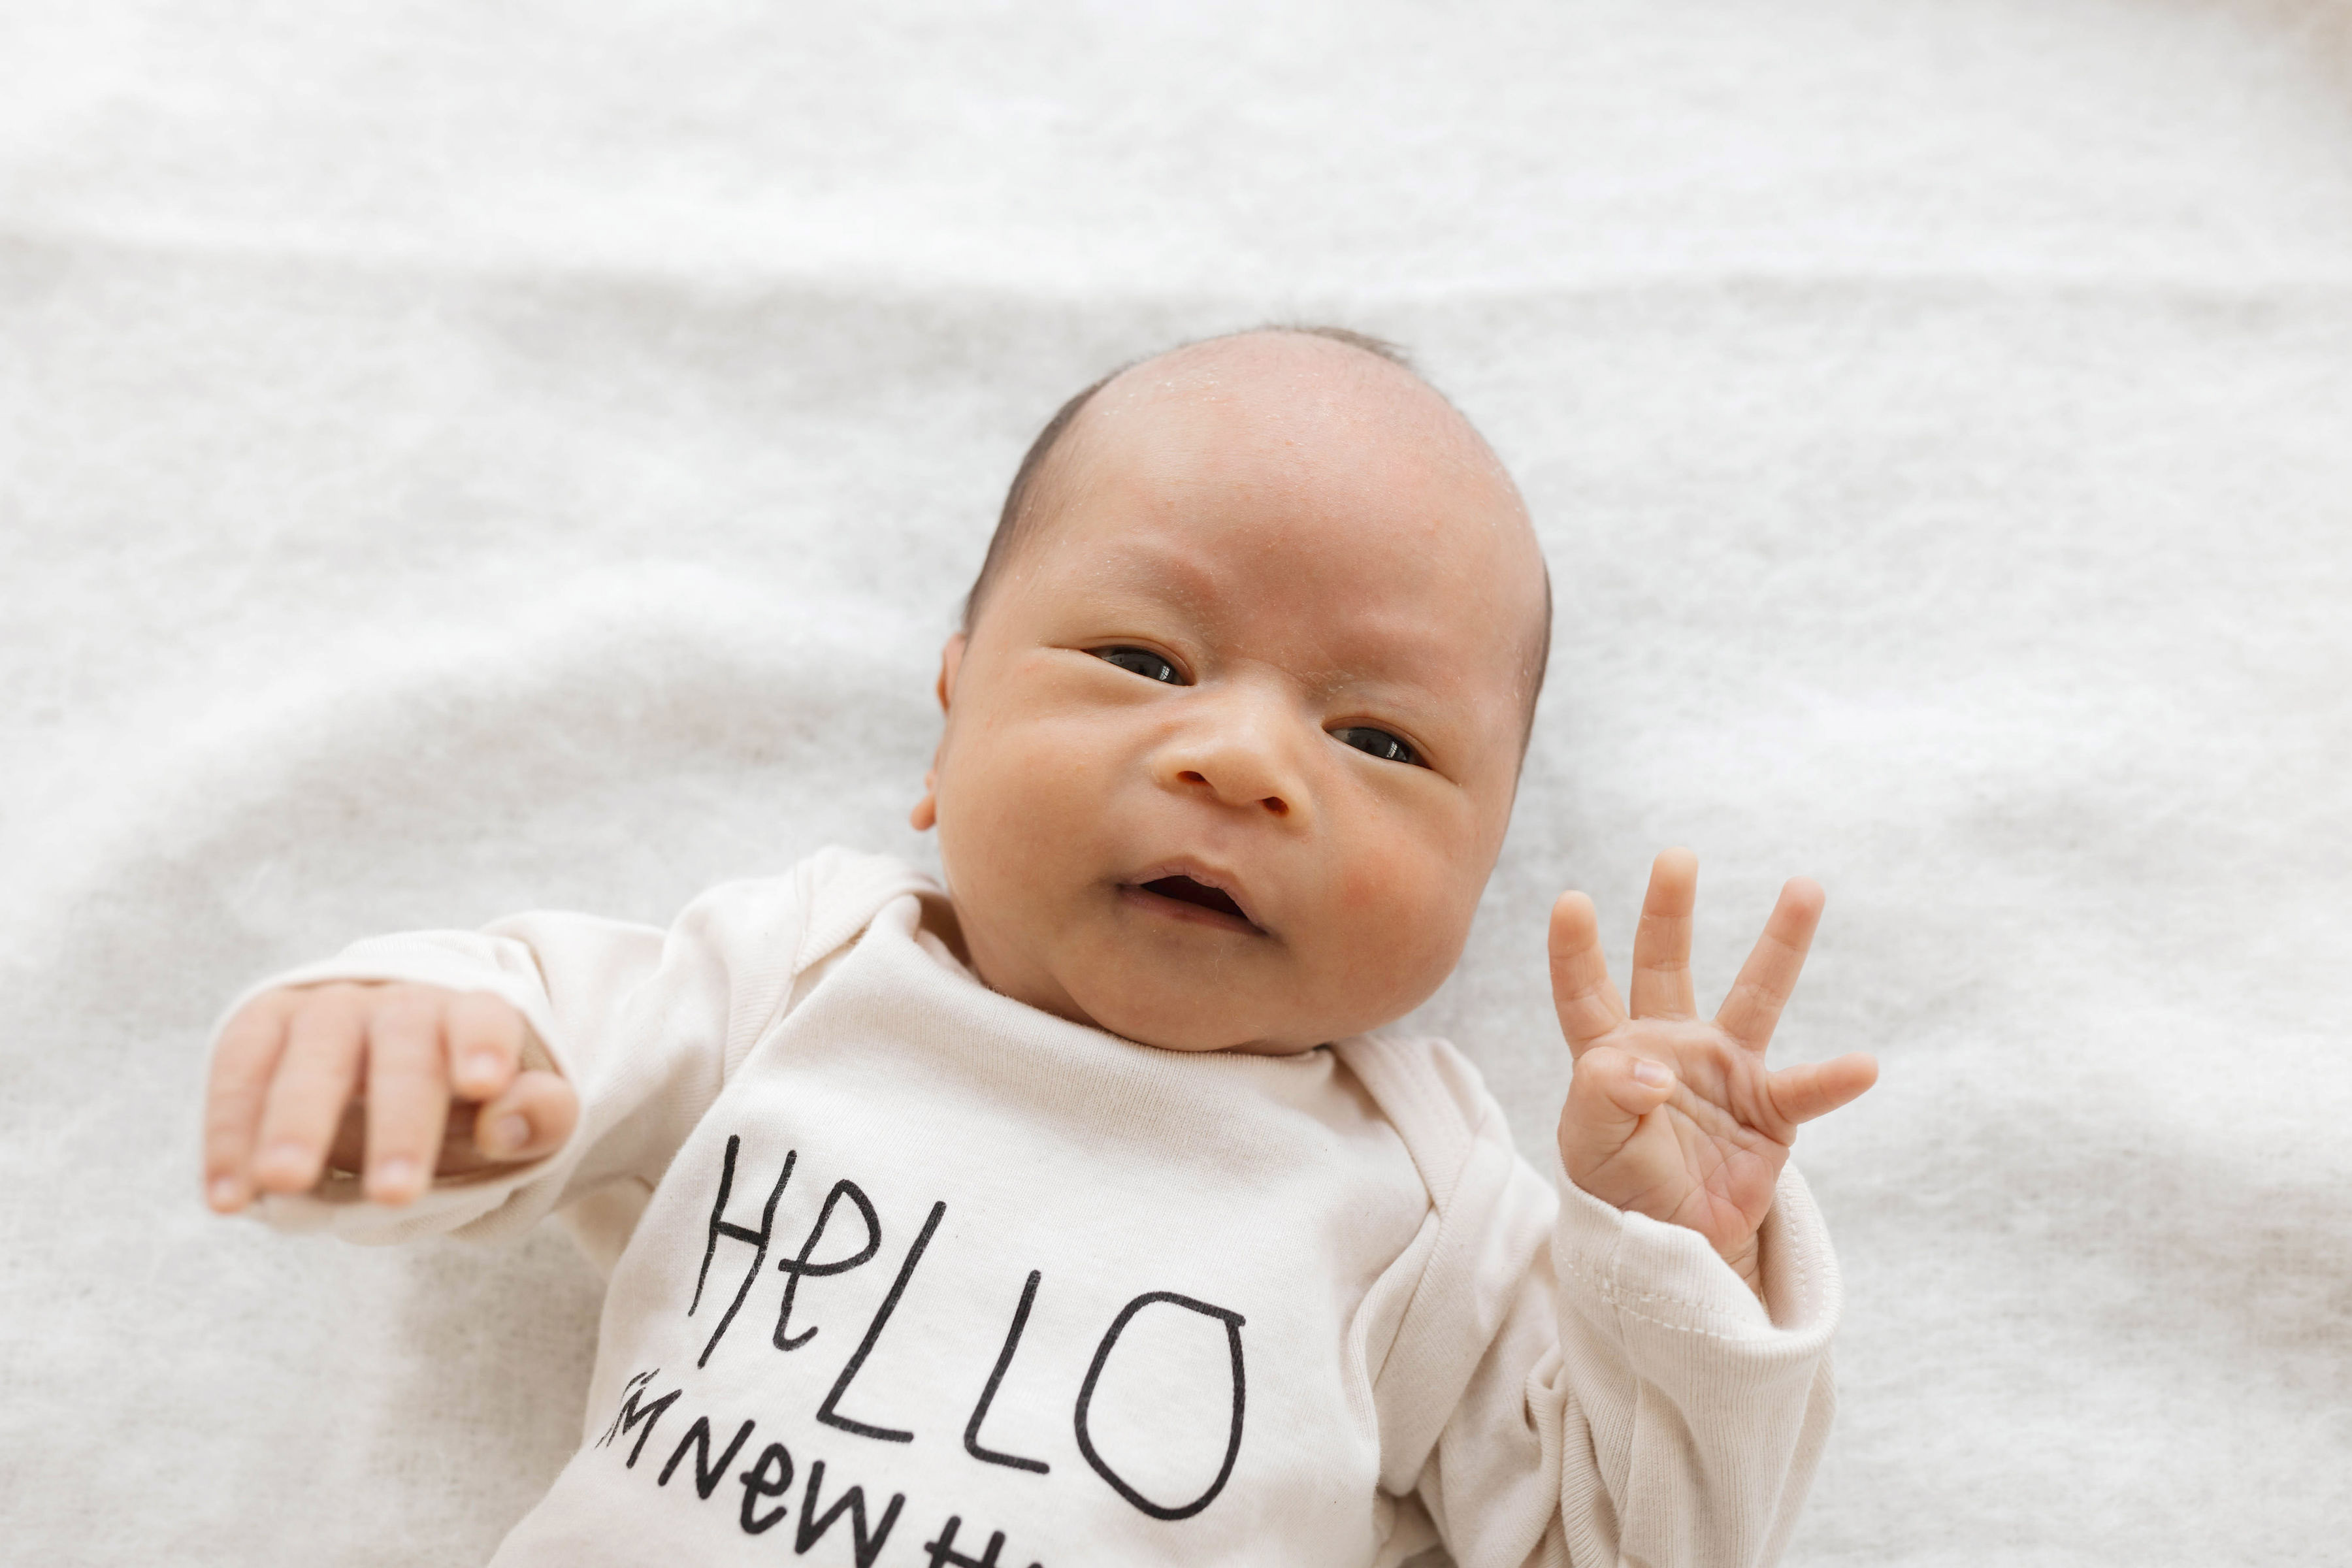 close up of a baby wearing a romper that says "Hello I'm new here"